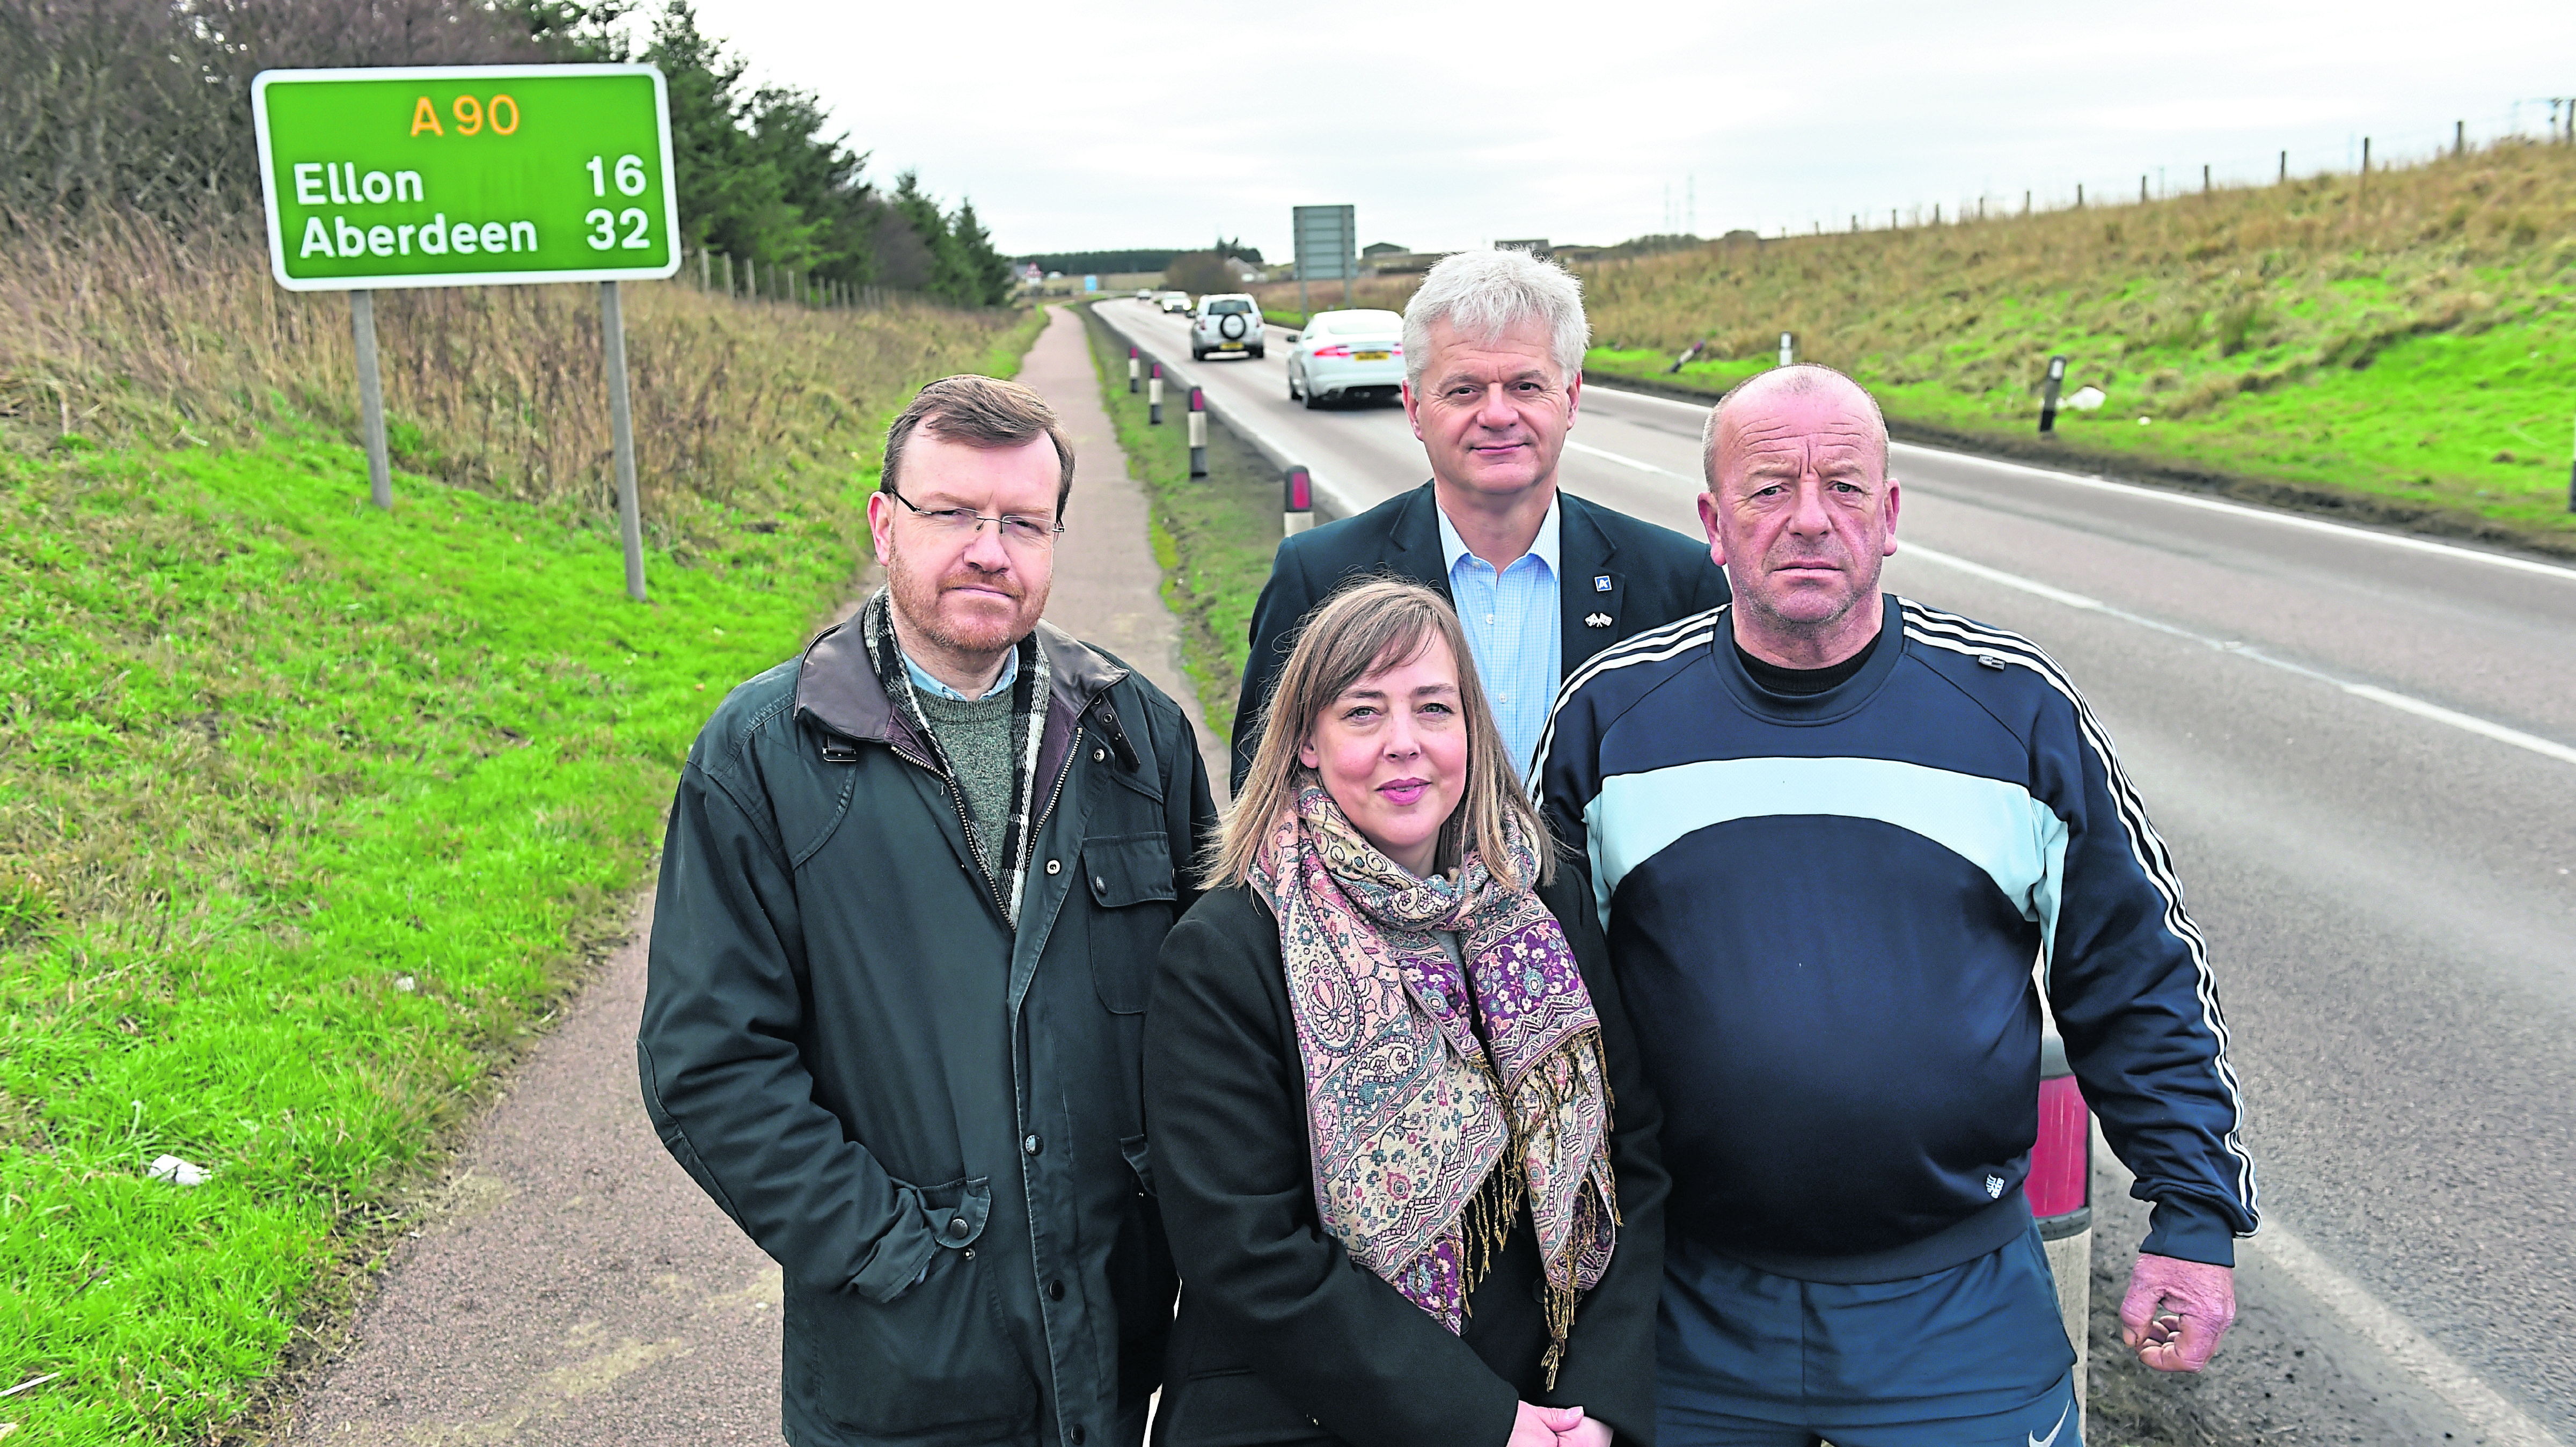 The AWPR is already delivering benefits to the north-east but campaigners want Peterhead linked to the dual carriageway